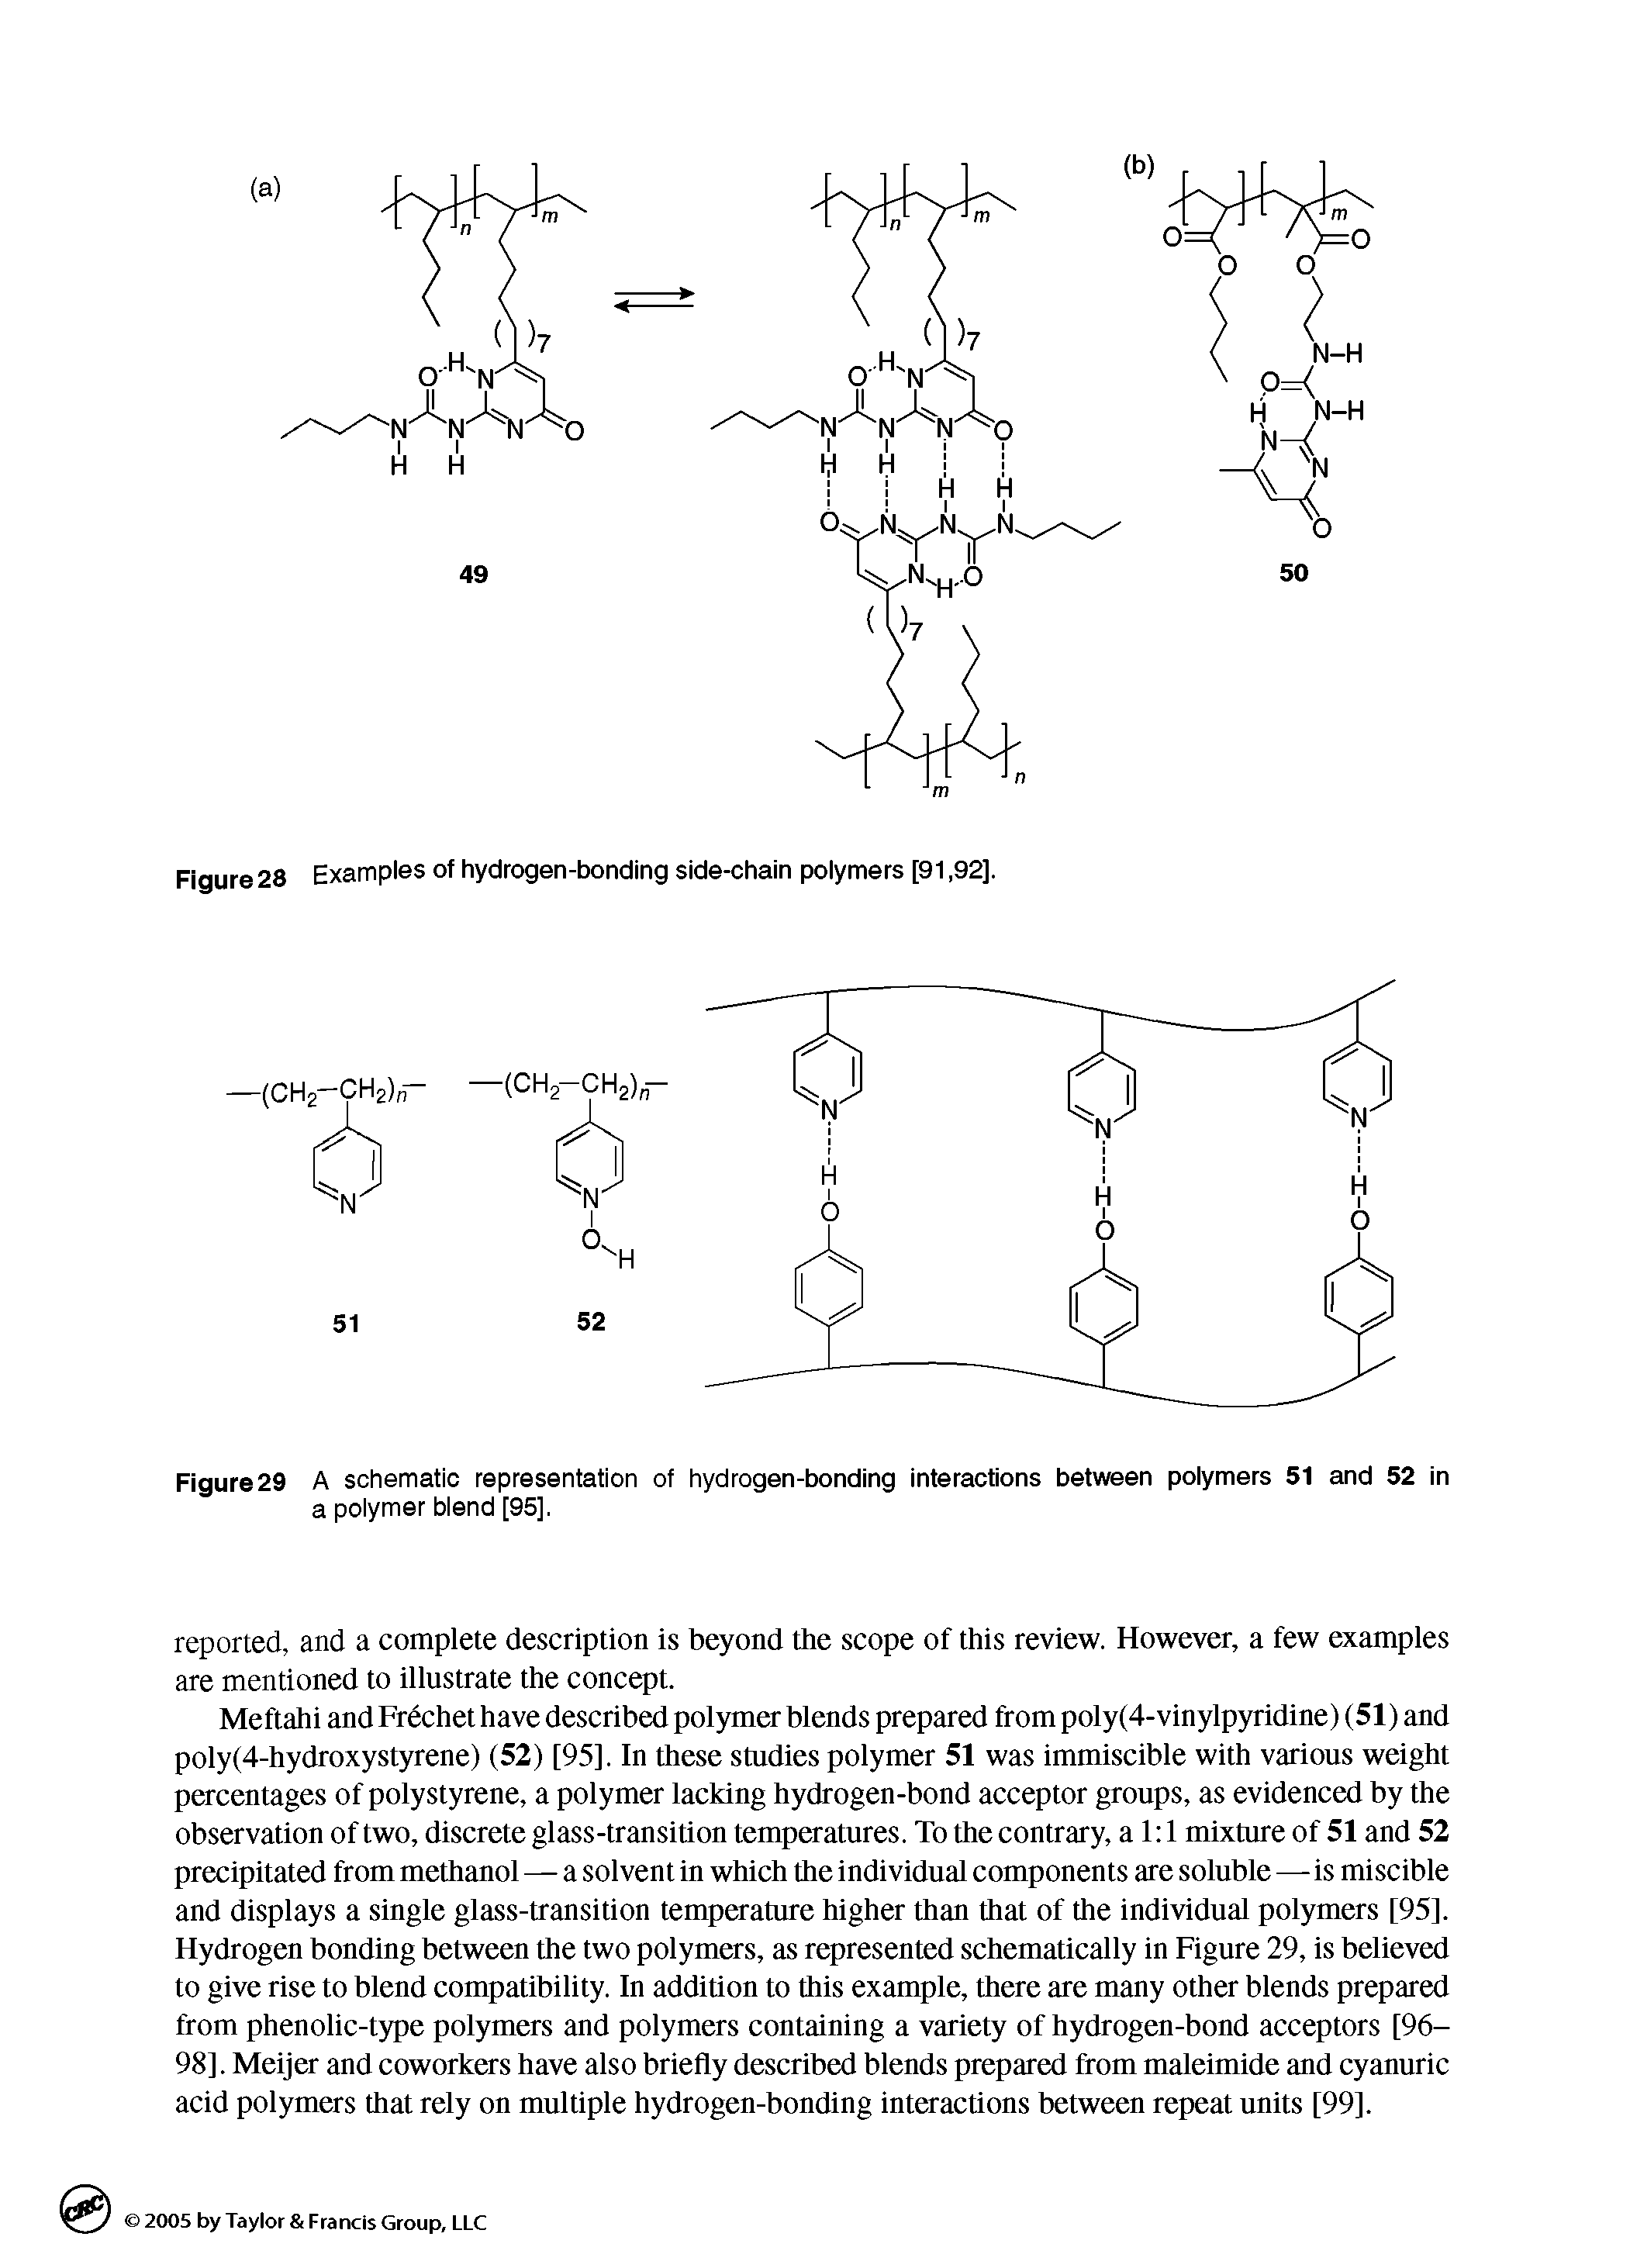 Figure 29 A schematic representation of hydrogen-bonding interactions between polymers 51 and 52 in a polymer blend [95],...